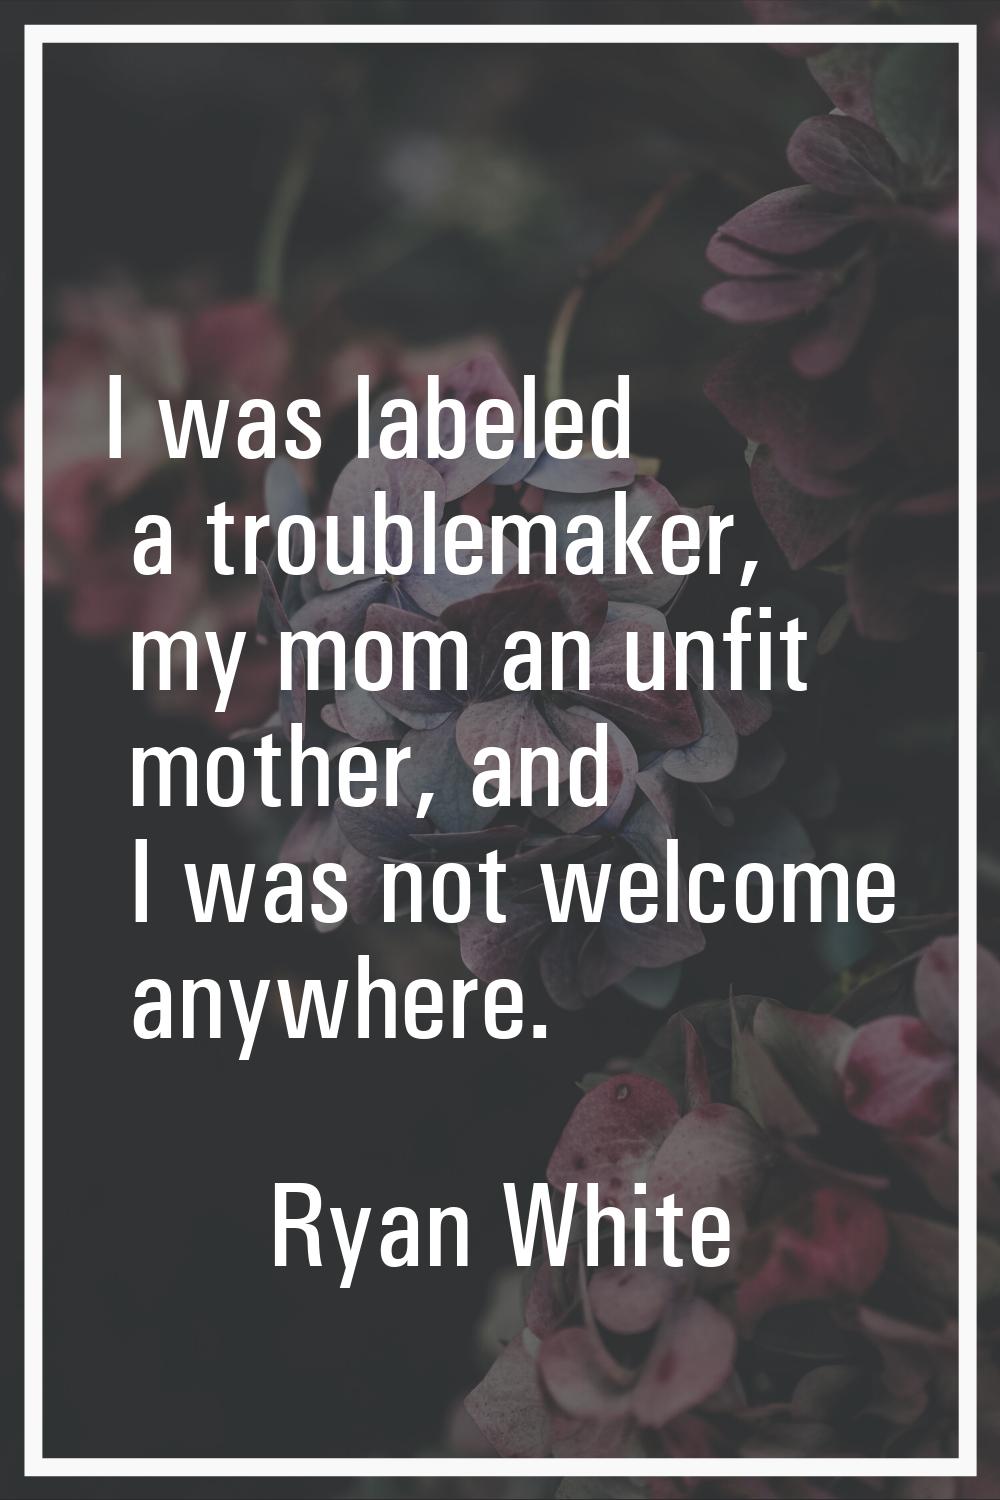 I was labeled a troublemaker, my mom an unfit mother, and I was not welcome anywhere.